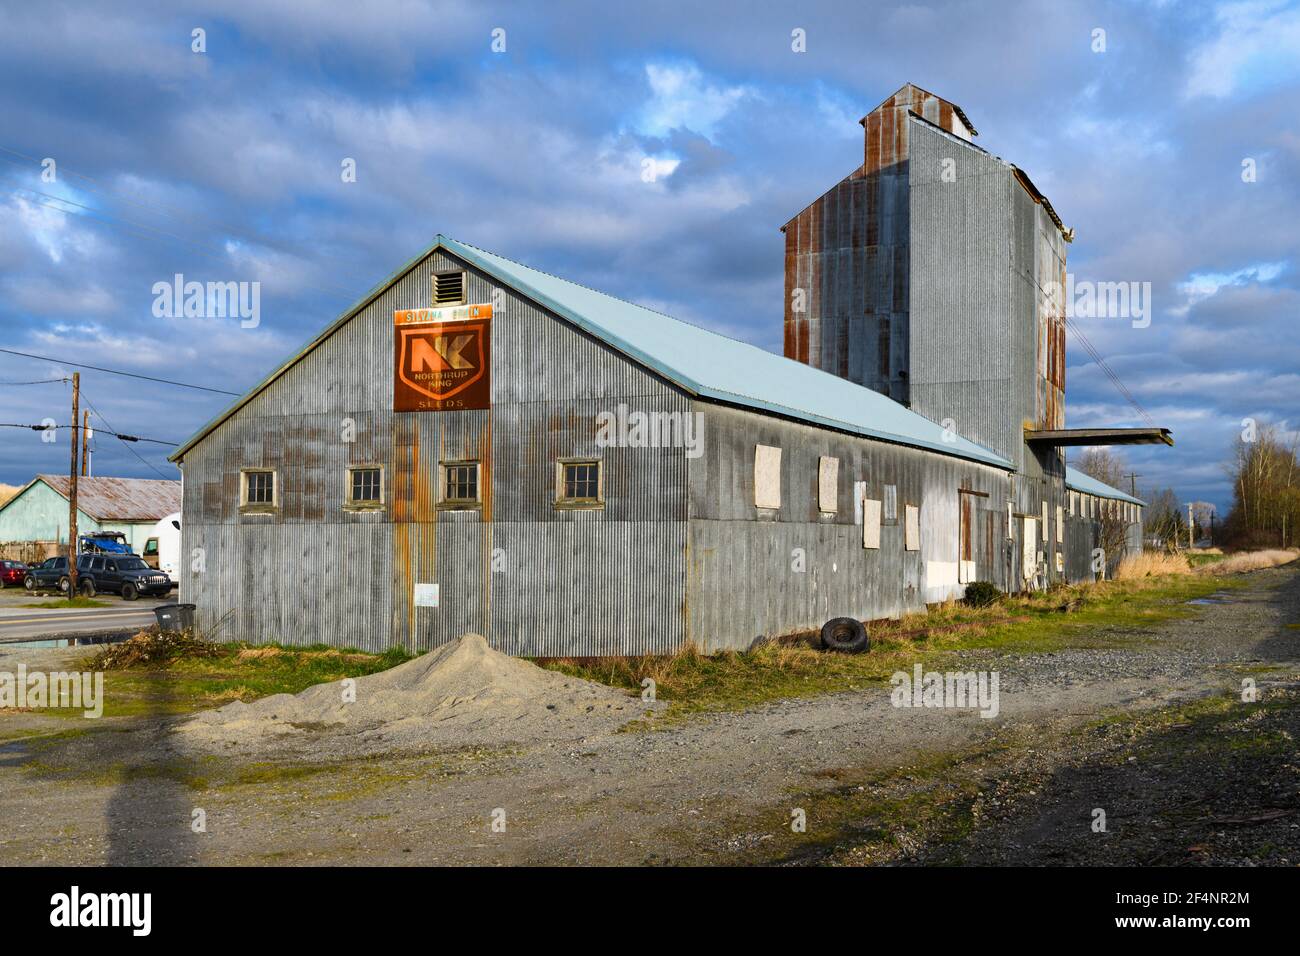 Northrup King Seeds metal warehouse in Snohomish County Washington, formerly the Silvana Grain building Stock Photo